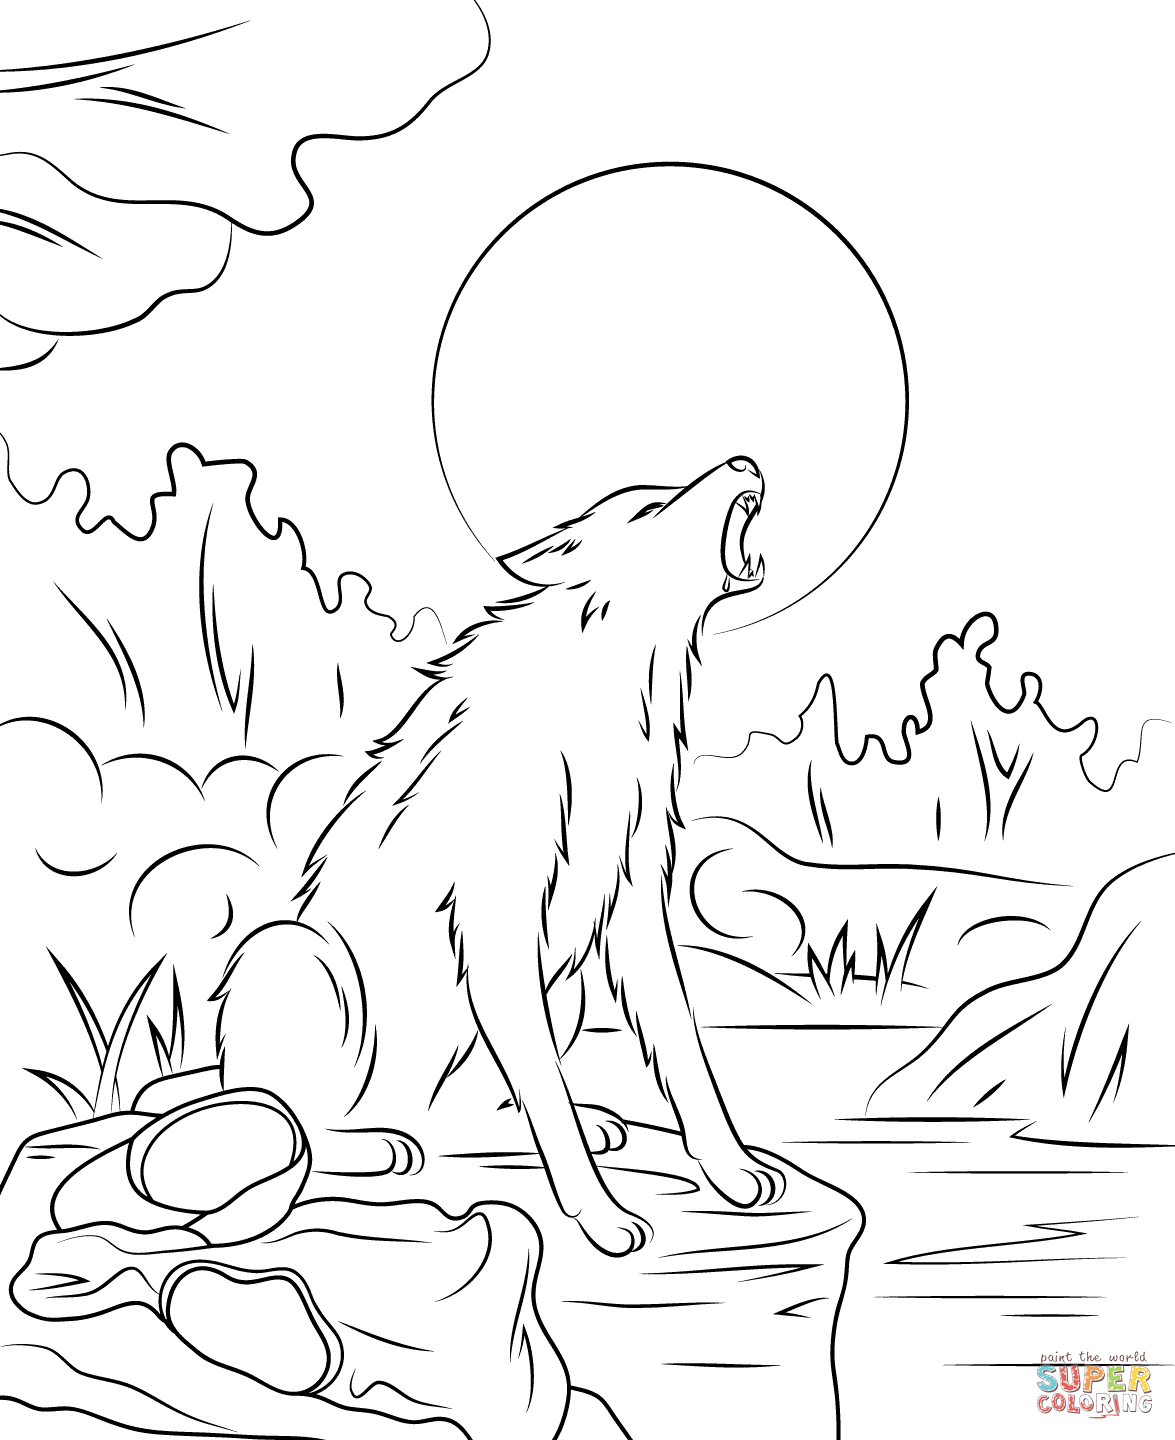 Werewolf coloring, Download Werewolf coloring for free 2019